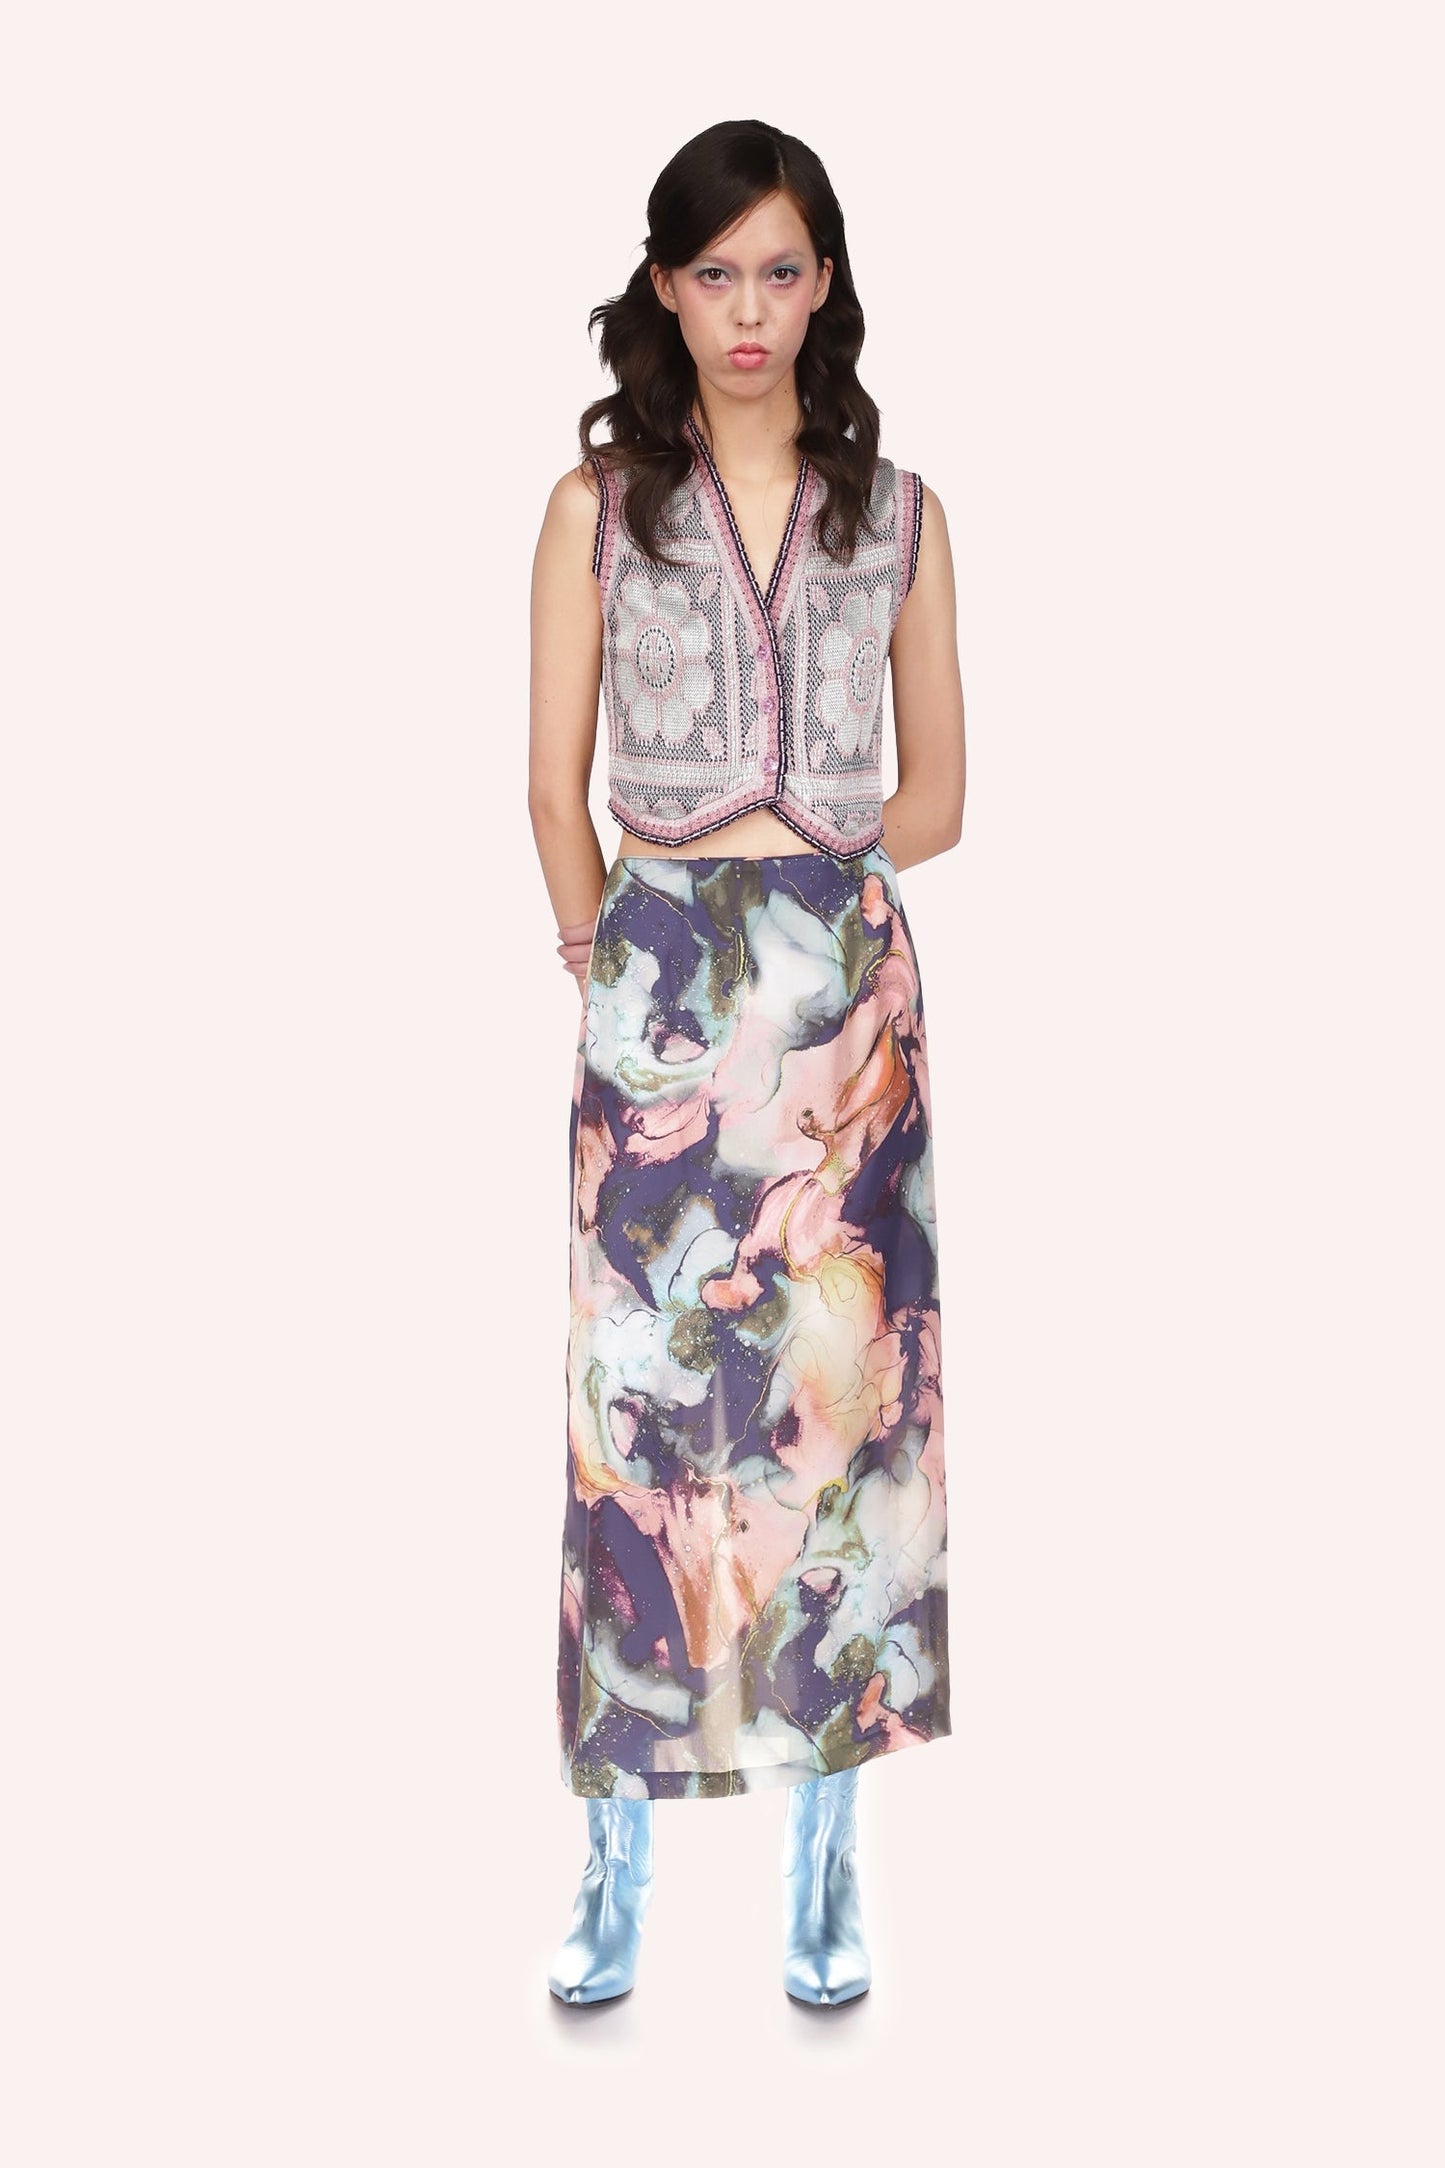 Cosmos Satin Skirt large blue floral with parch of pink and yellow colors, above ankles long.